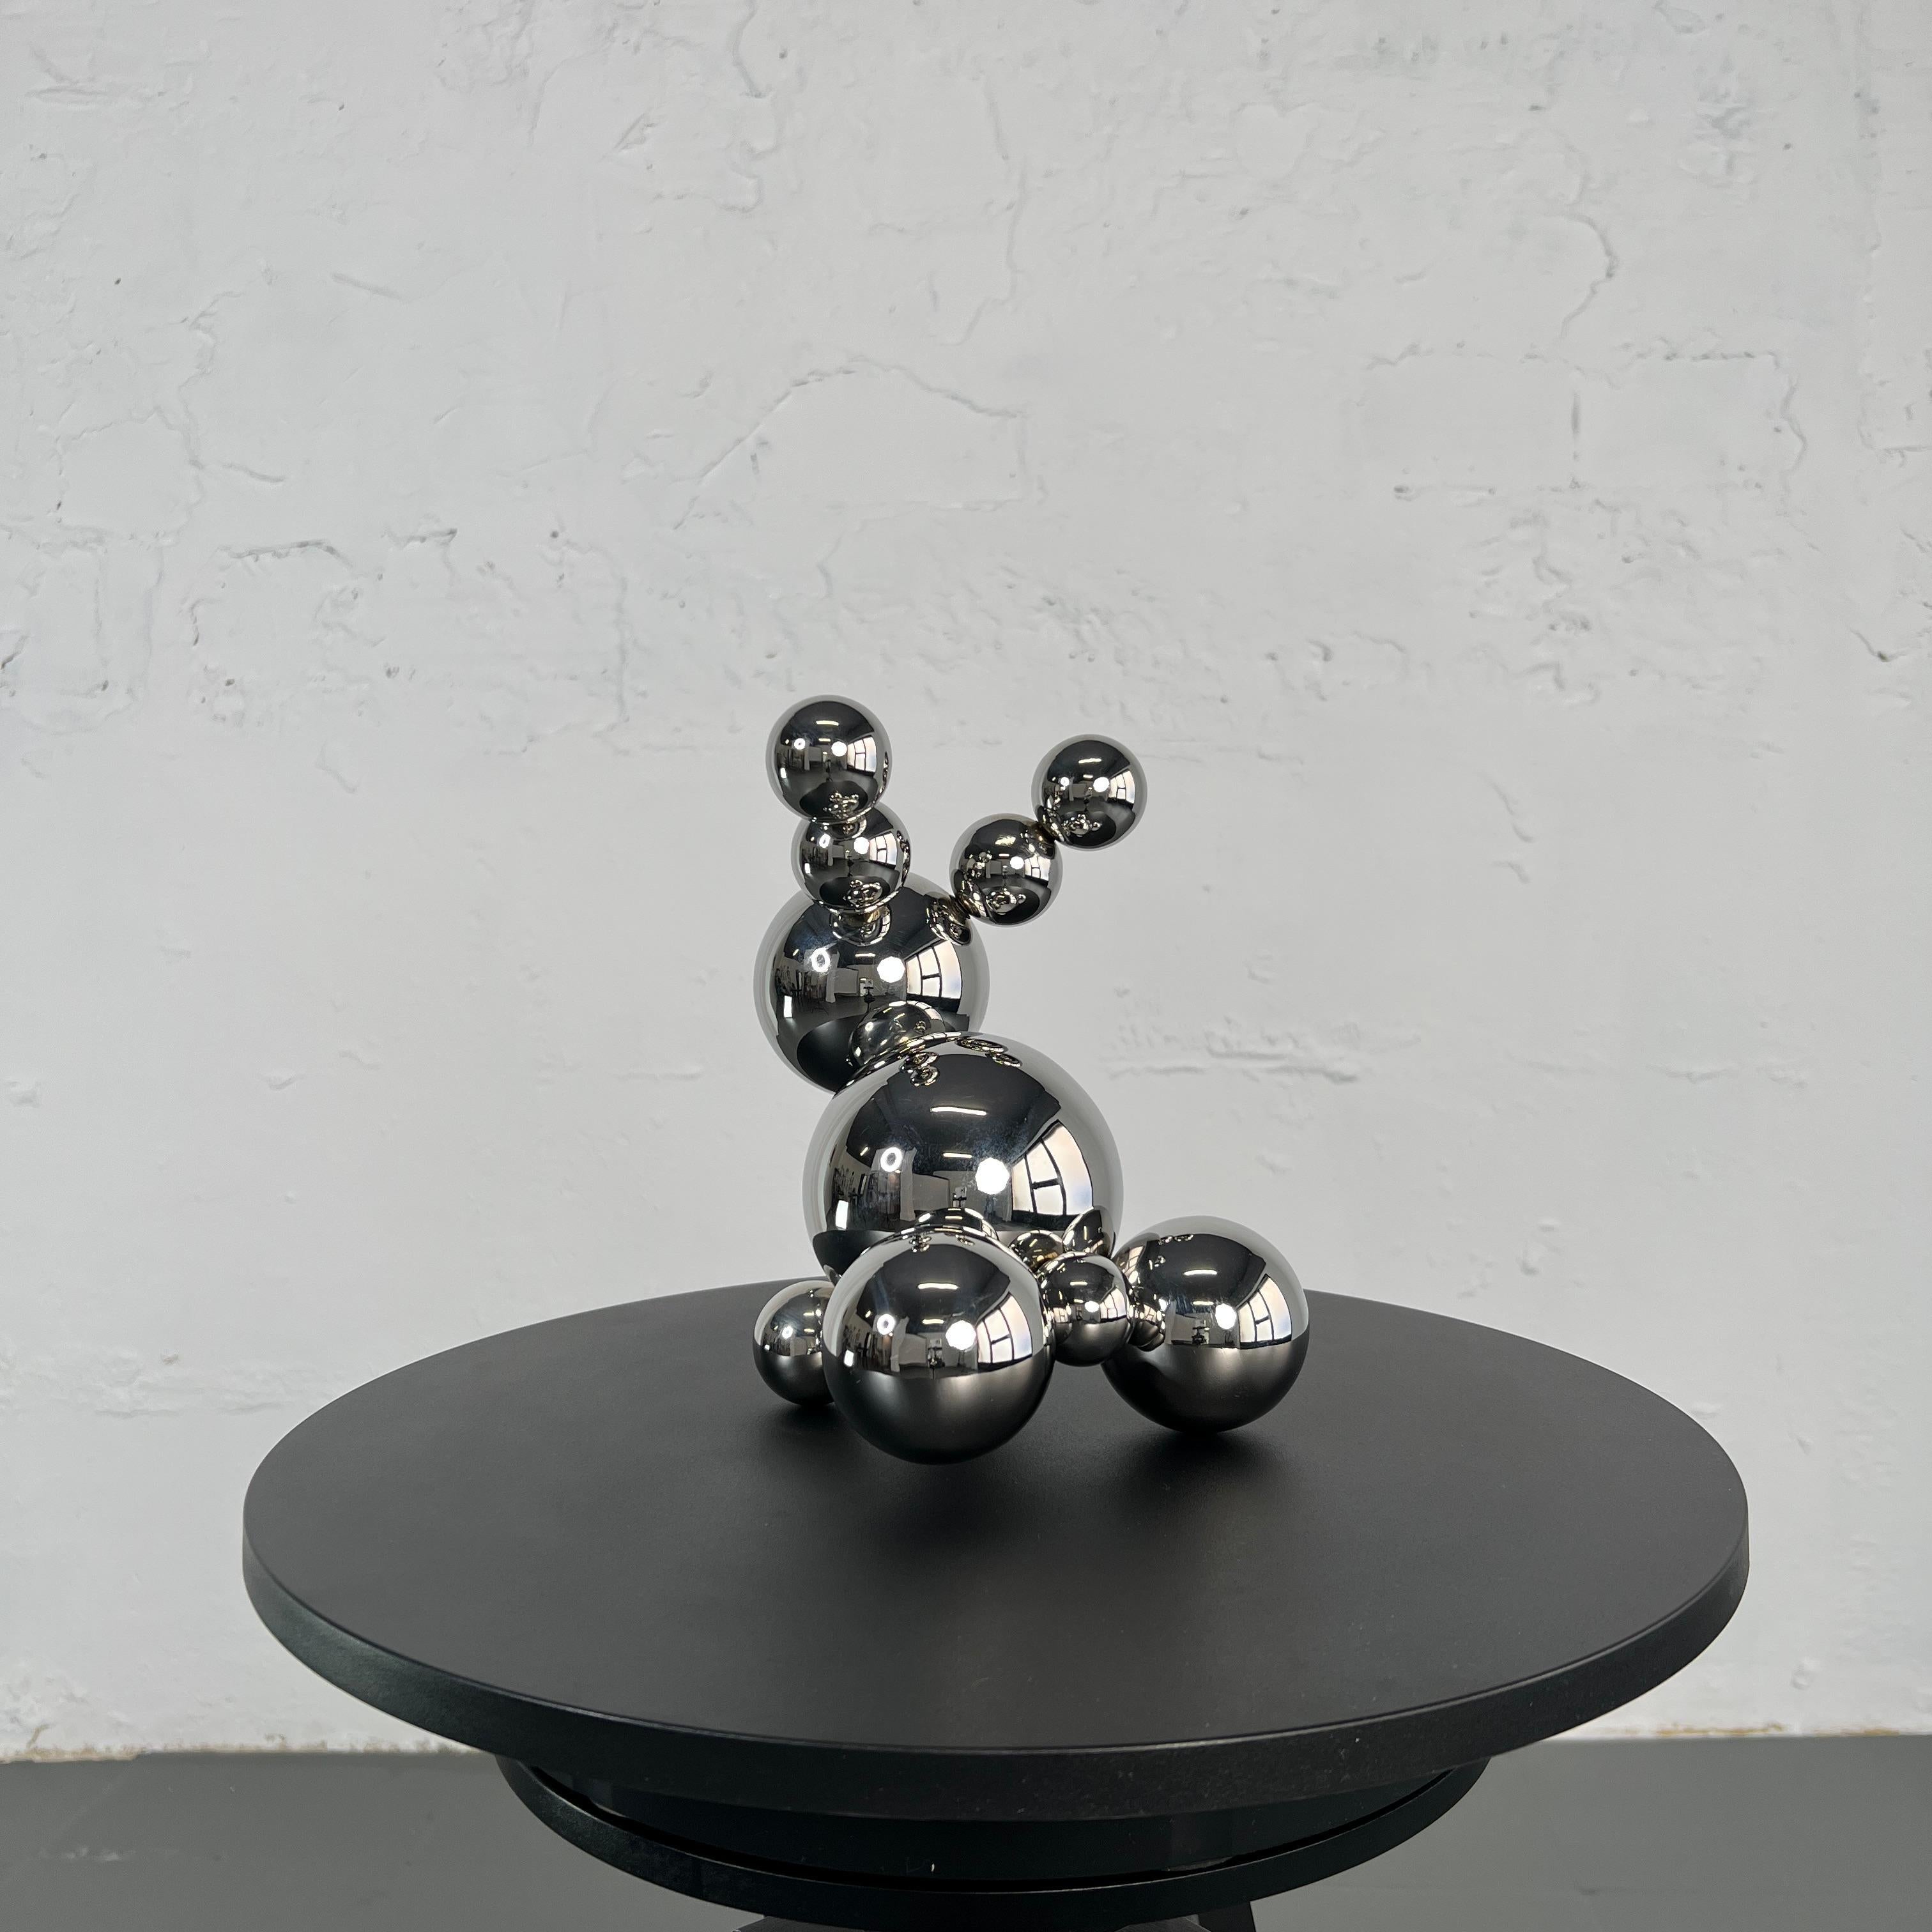 Made in Spain, 2023.

A simple form builds a complex one. In our approach, we go from the opposite, representing complex things in simple forms. So, our rabbit consists of simple steel balls, but this minimalism does not stop making him a rabbit. Do